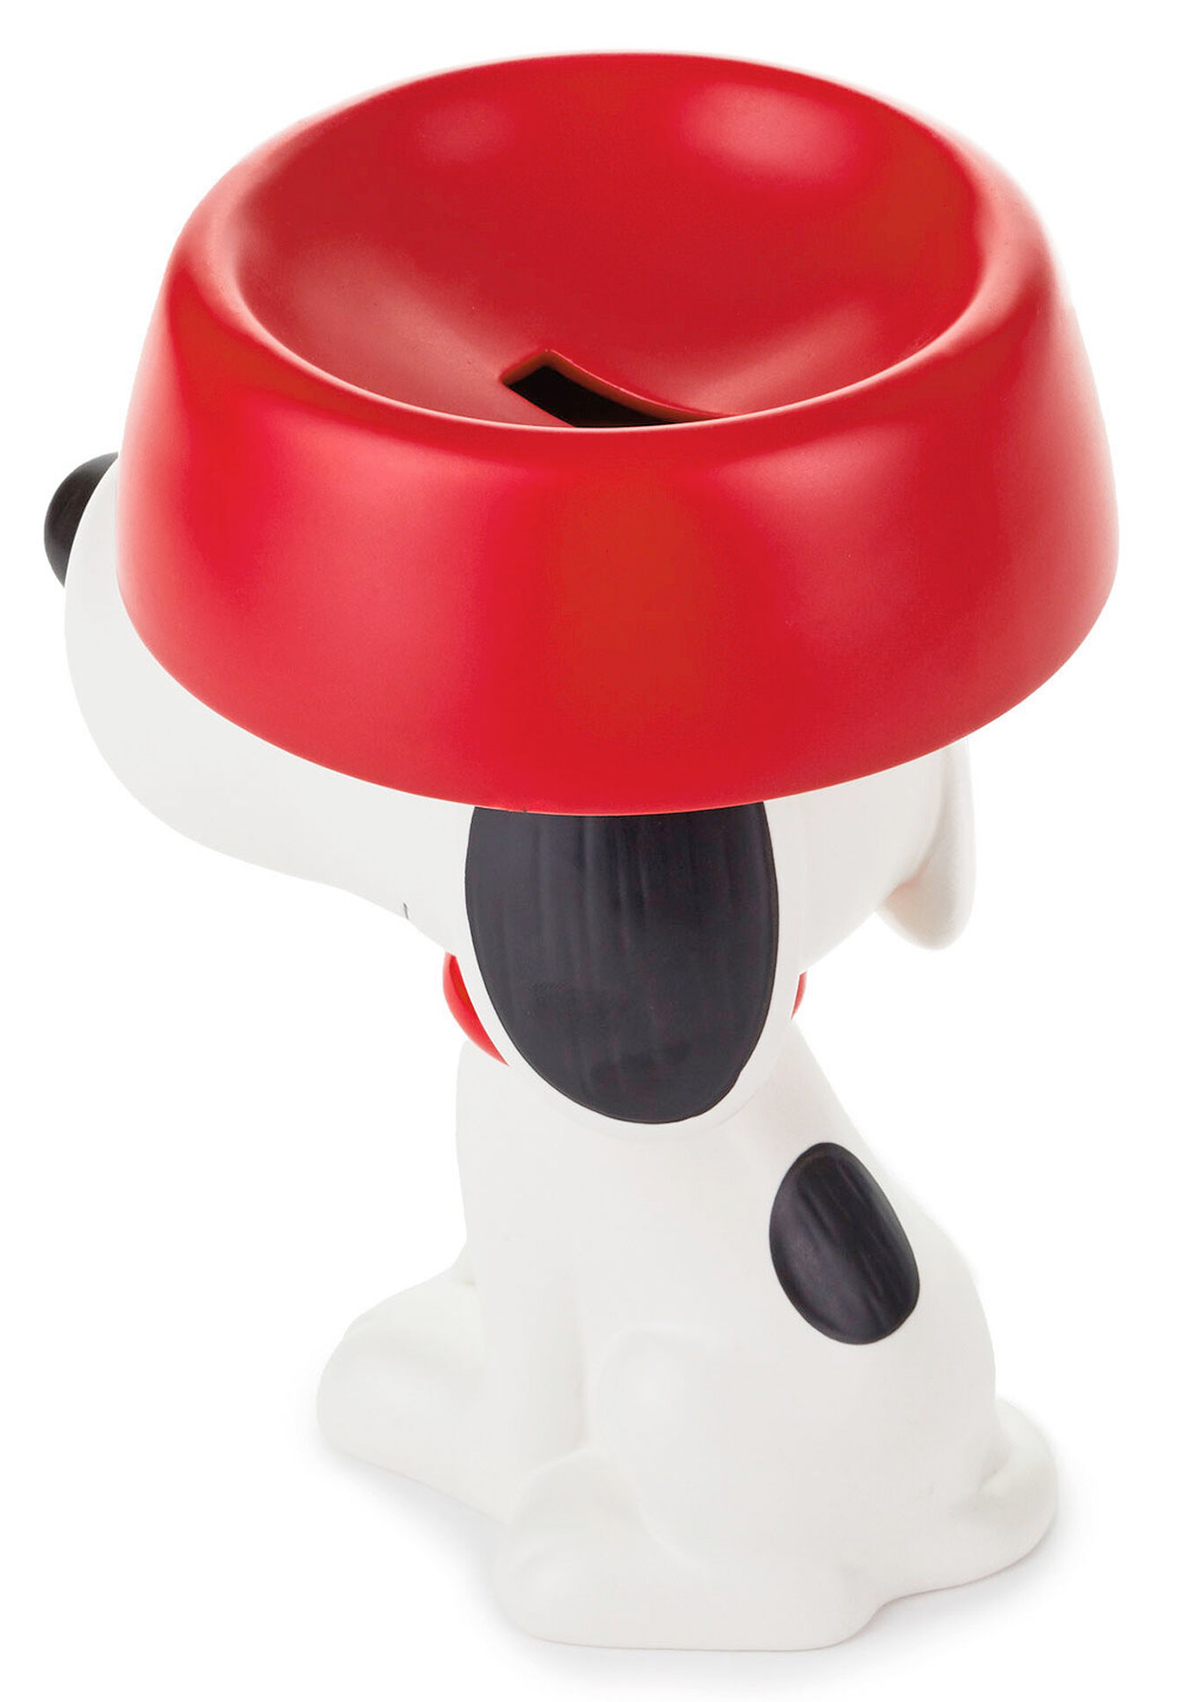 Snoopy Safe with Red Bowl on His Head (Peanuts)